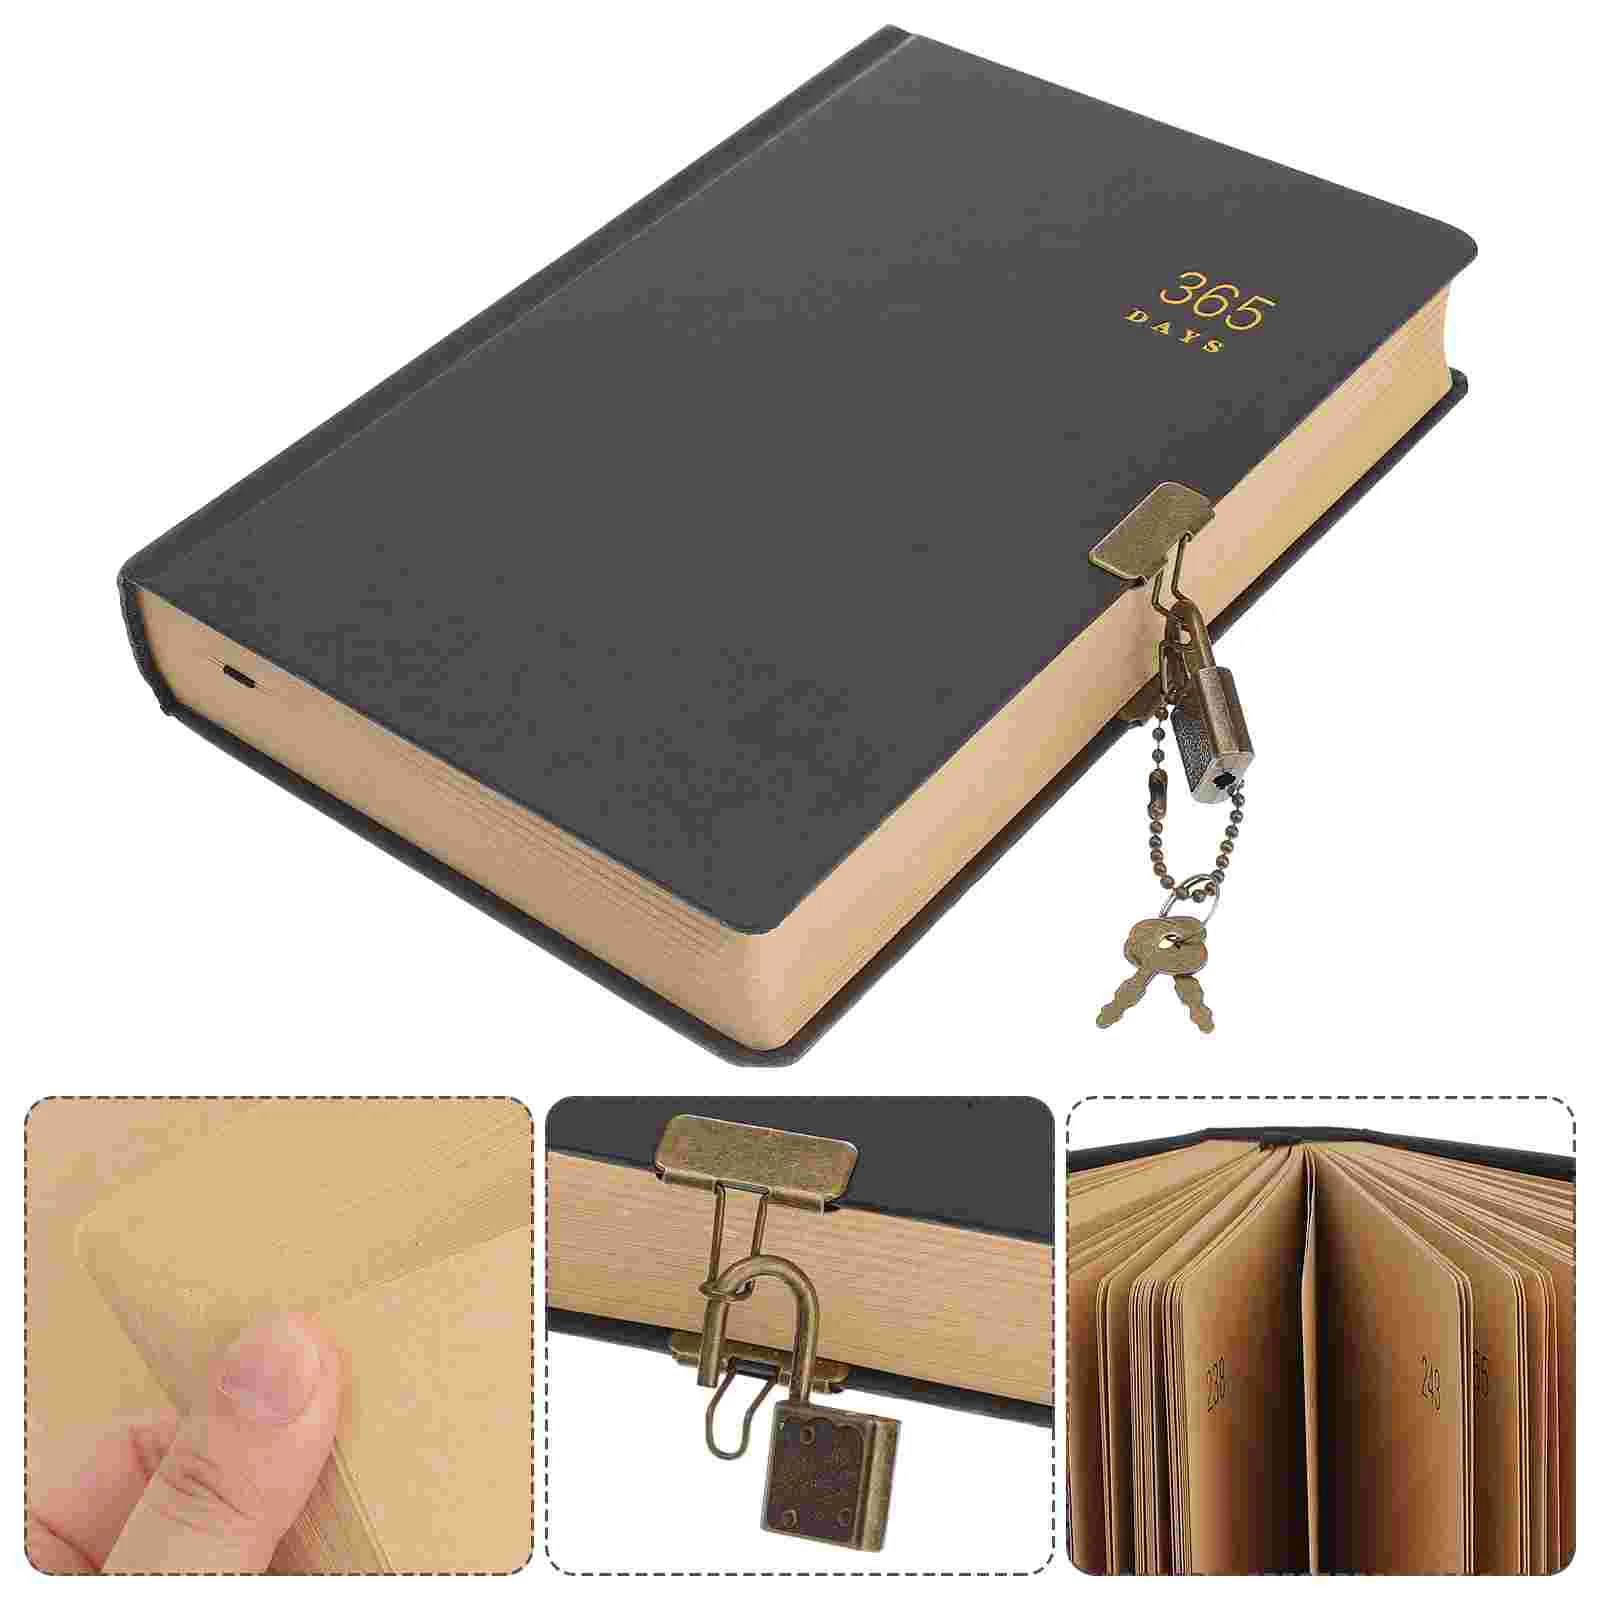 

Journal Notebook with Lock 365 Days Secret Diary Lovely Notebook Writing Diary Notebook for Student Man Woman Journals to write